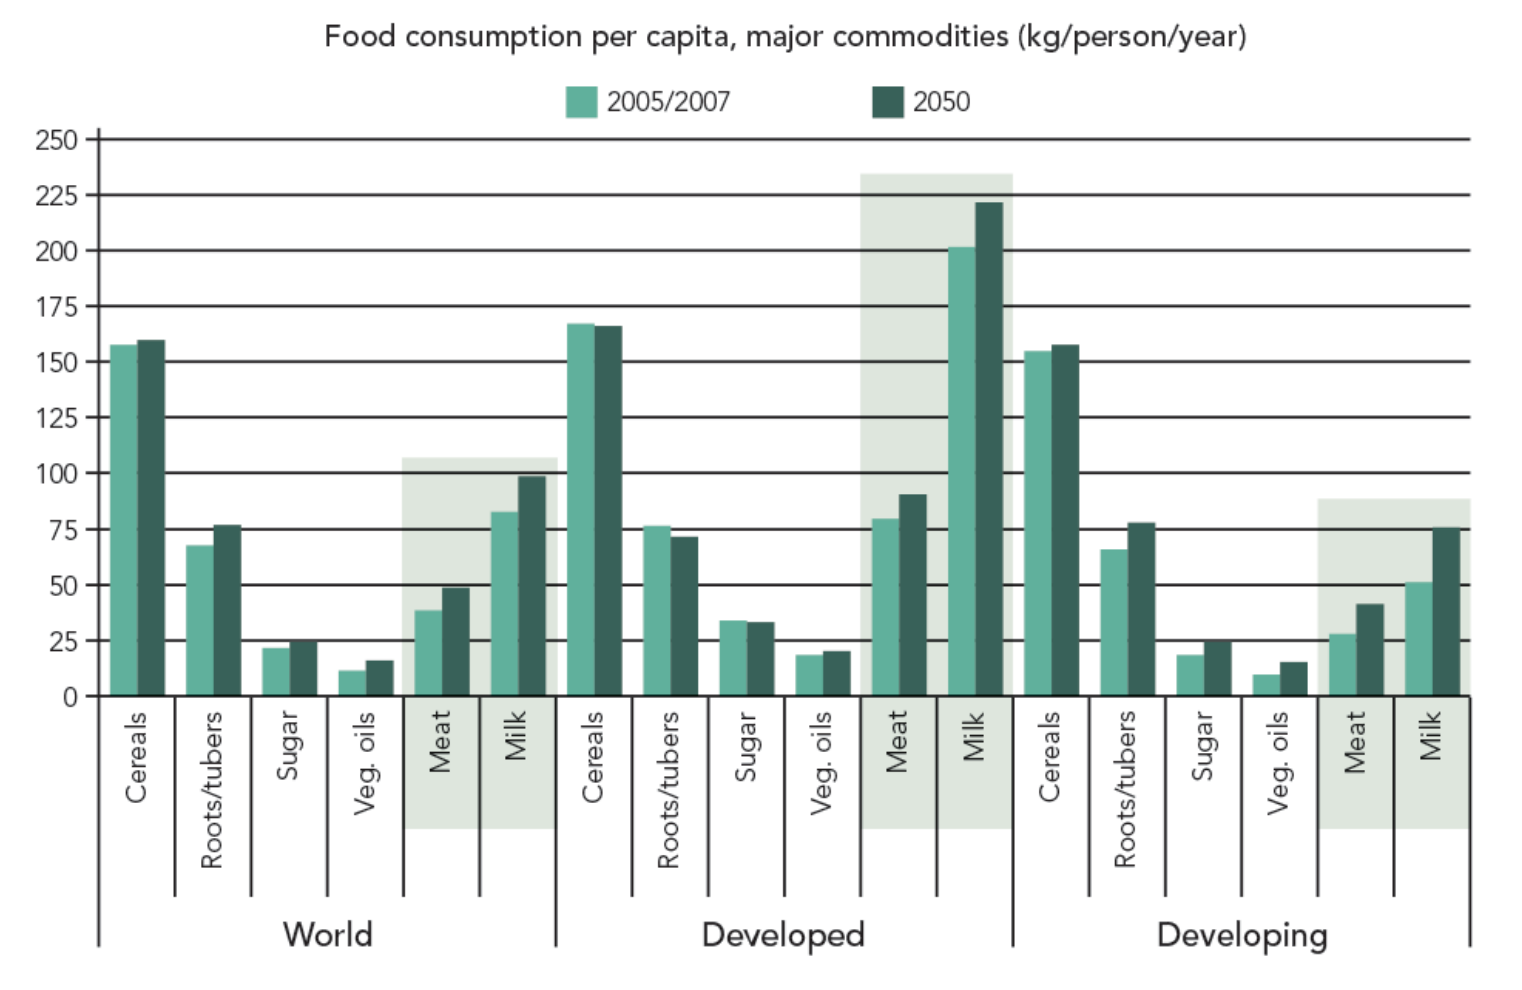 Figure 11: Projected increase in per capita consumption of major commodities between 2005/2007 and 2050, in developed and developing countries.